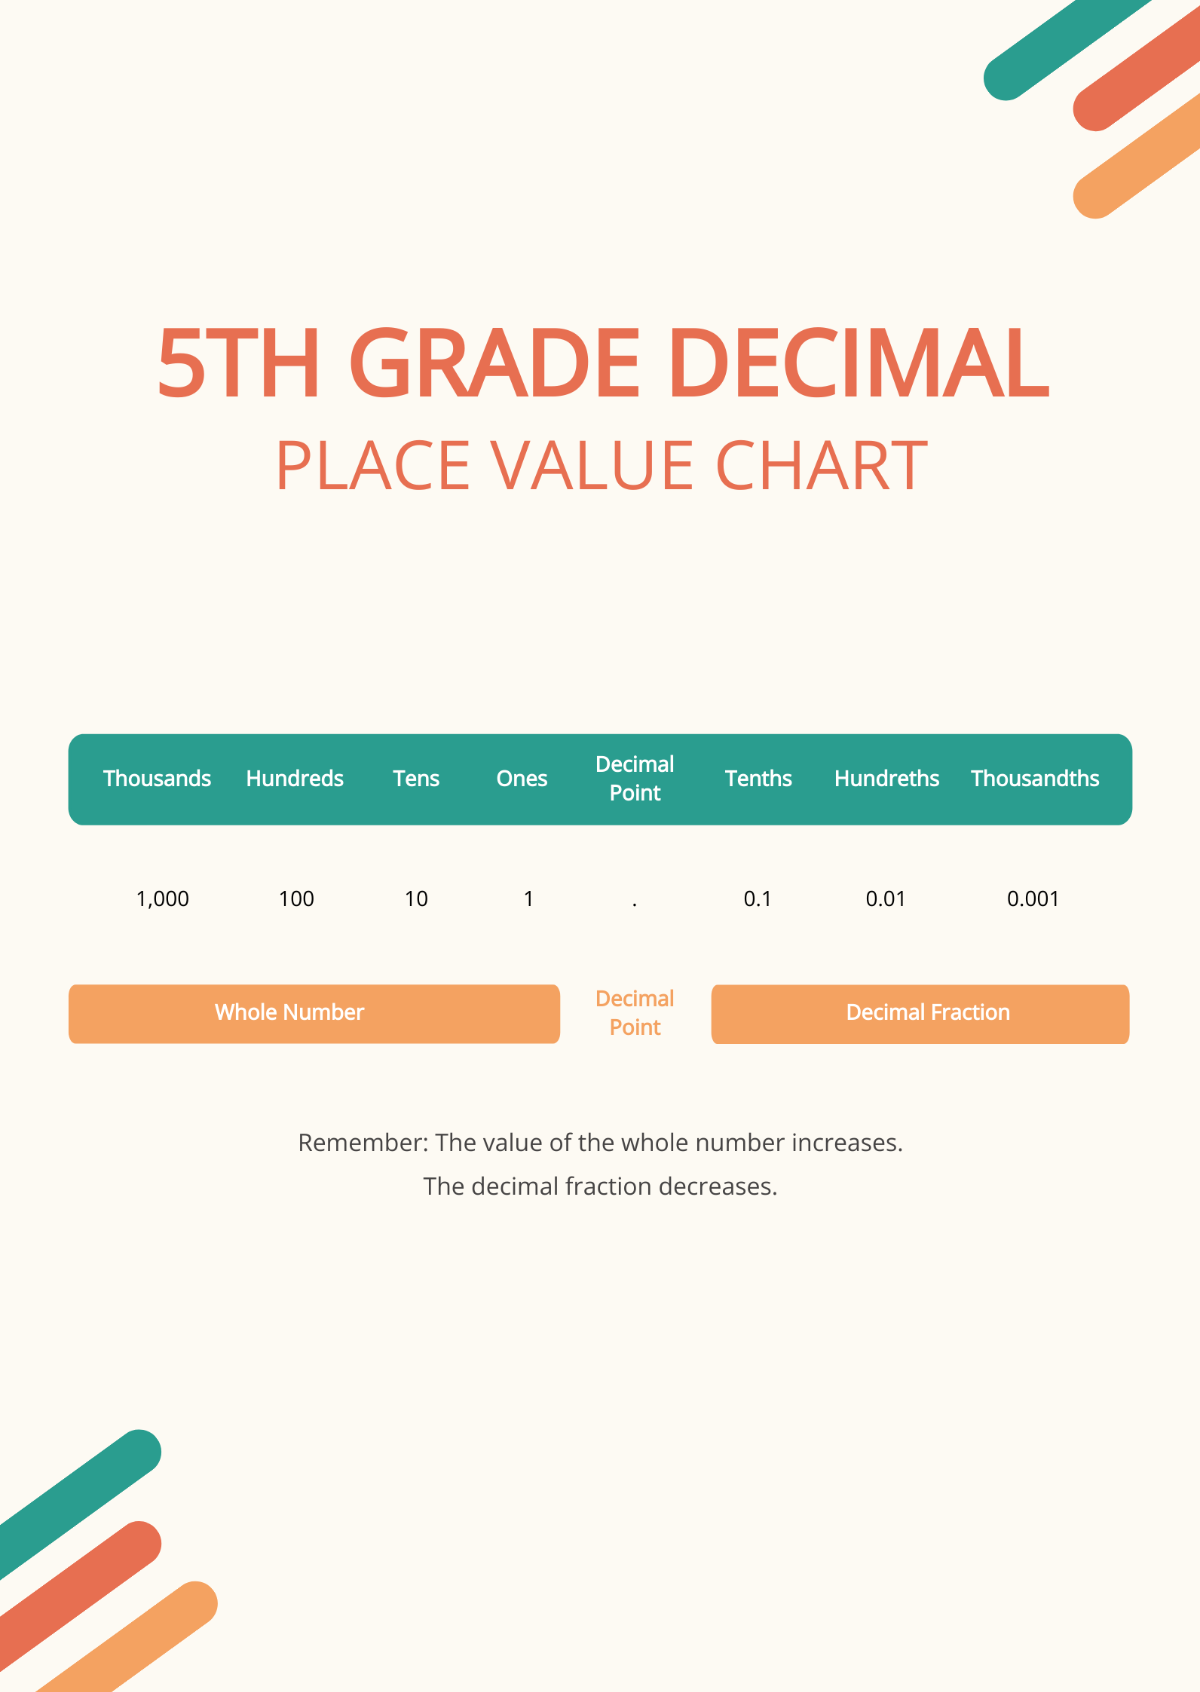 5th Grade Decimal Place Value Chart Template